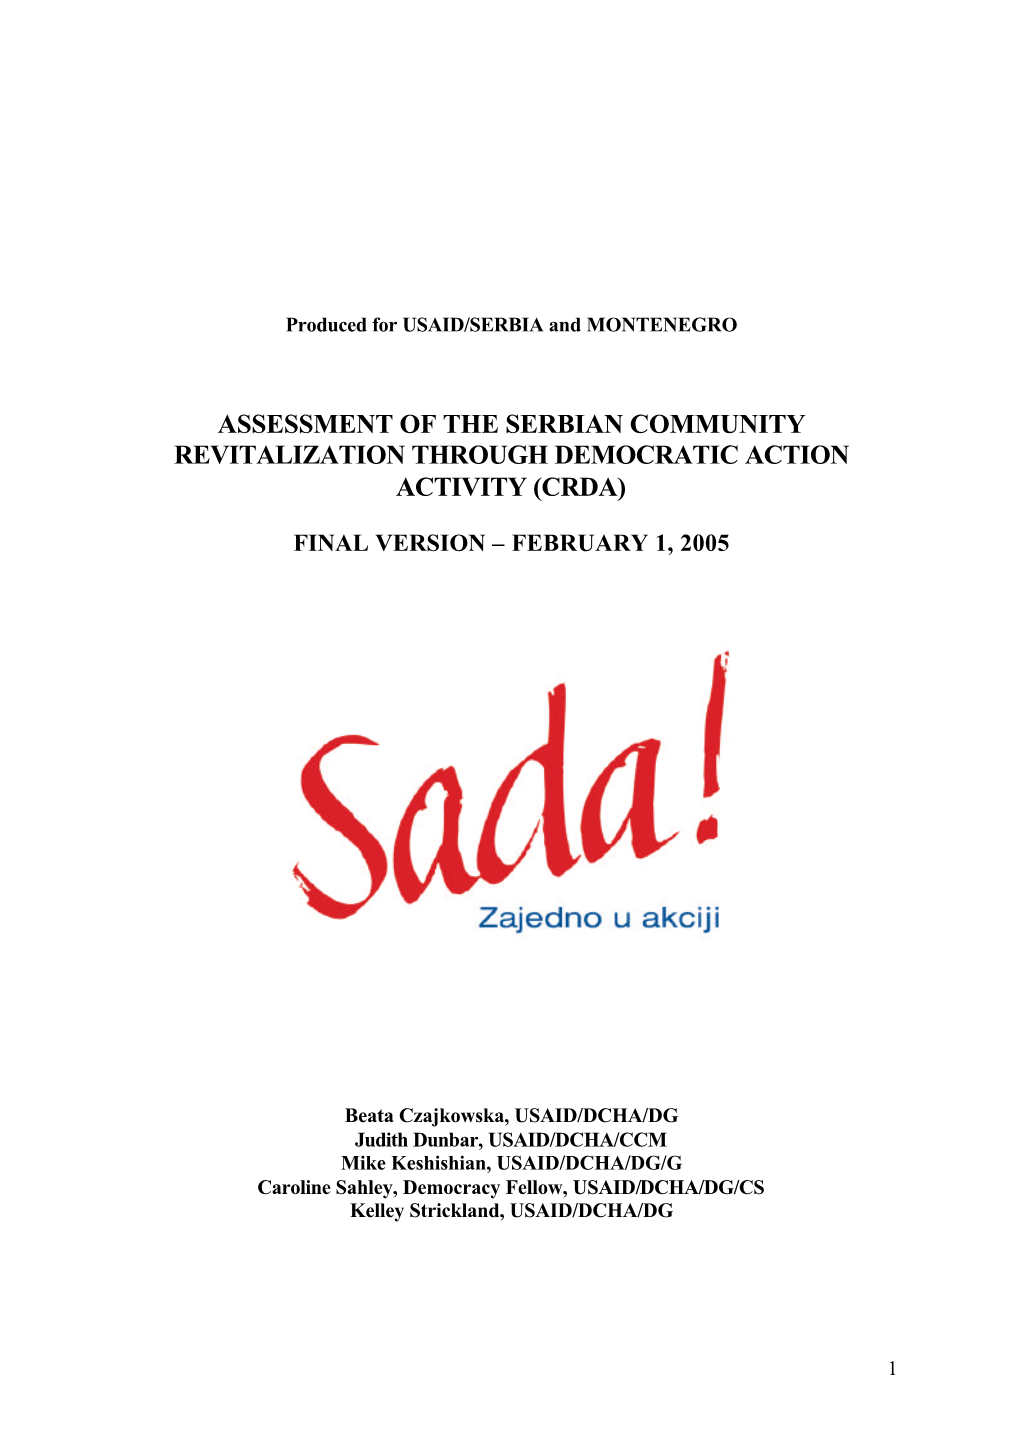 Assessment of the Serbian Community Revitalization Through Democratic Action Activity (Crda)